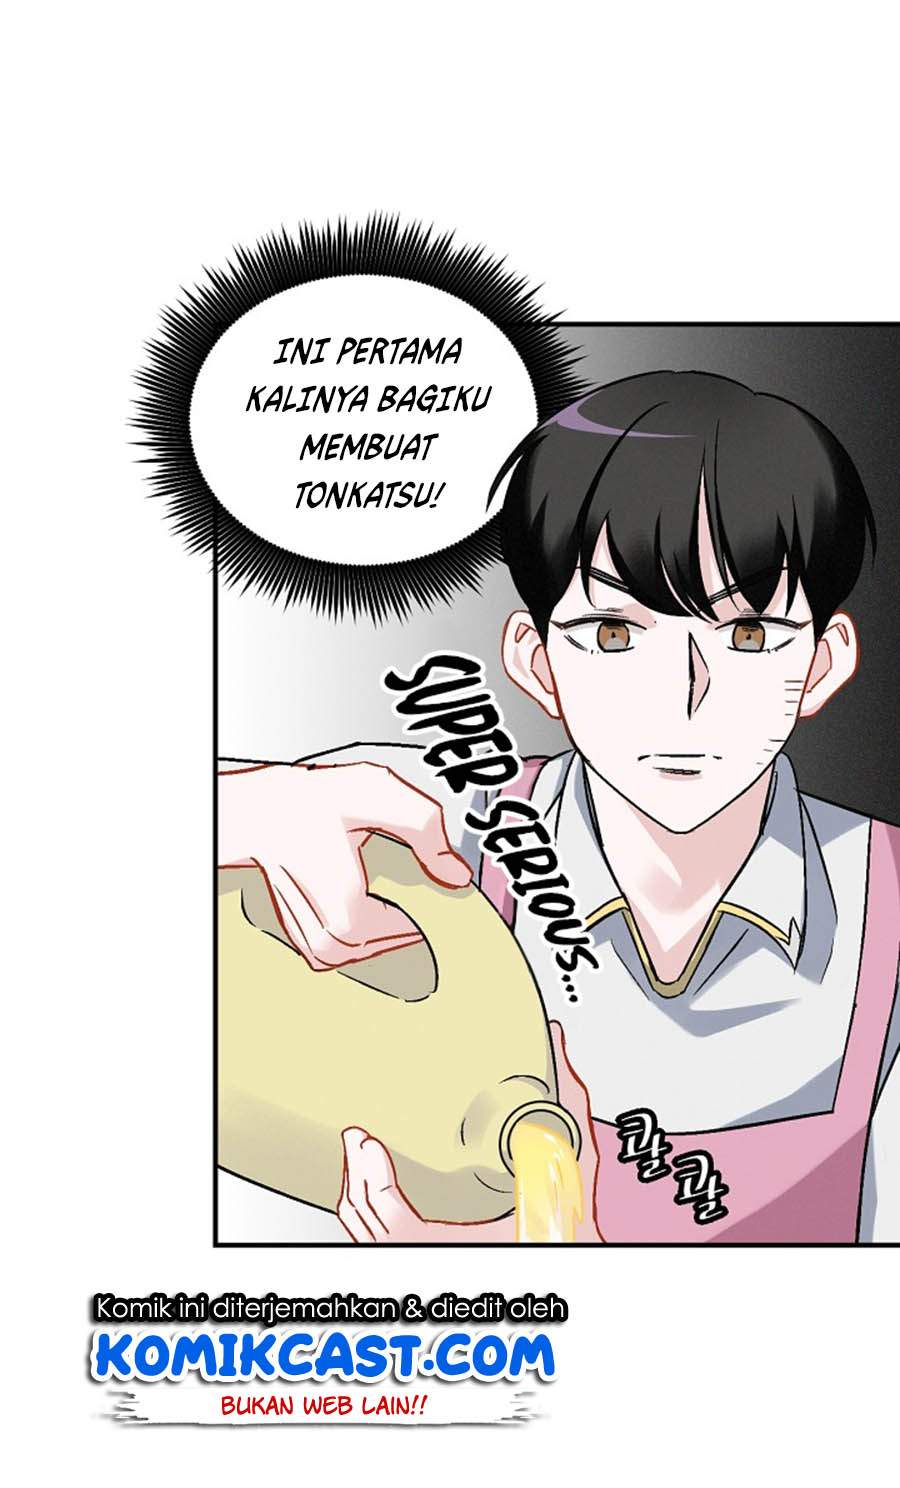 Leveling Up, By Only Eating! (Gourmet Gaming) Chapter 18 - 583